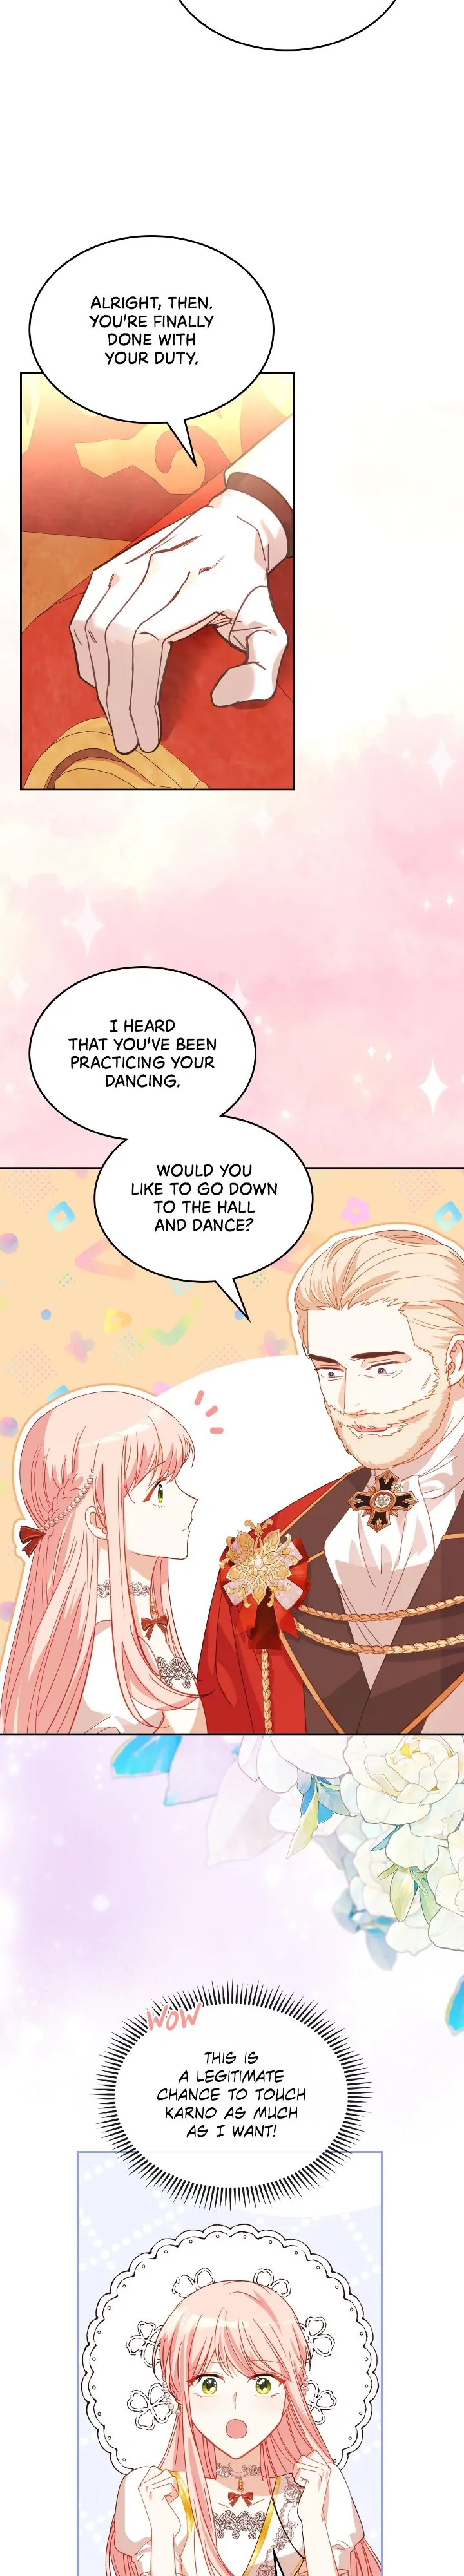 The Villainous Princess Wants To Live In A Gingerbread House - chapter 103 - #3